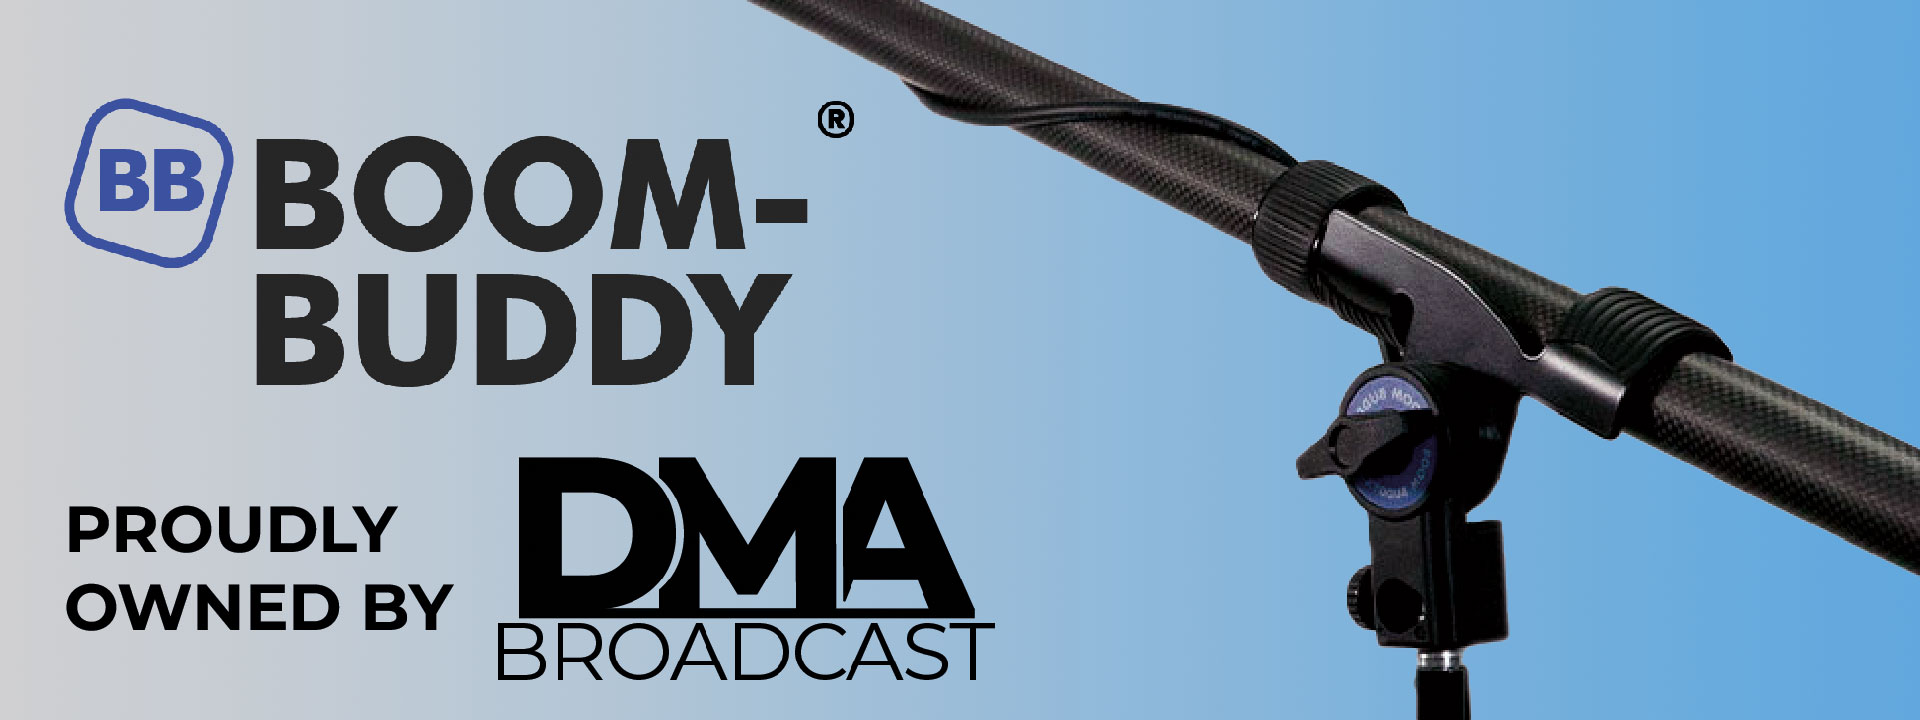 Now Owned by DMA Broadcast